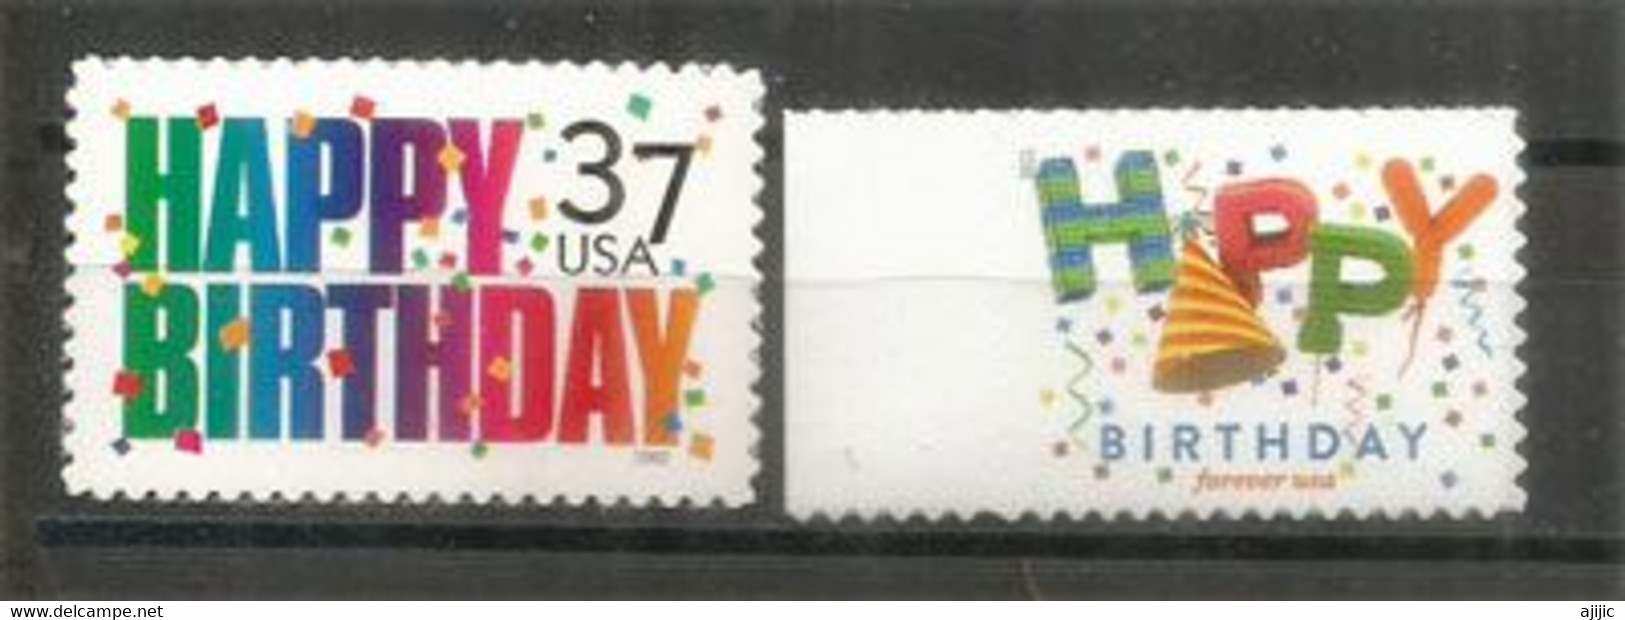 Happy Birthday !  Inclus Forever Stamp.  2 Timbres Neufs ** - Ongebruikt